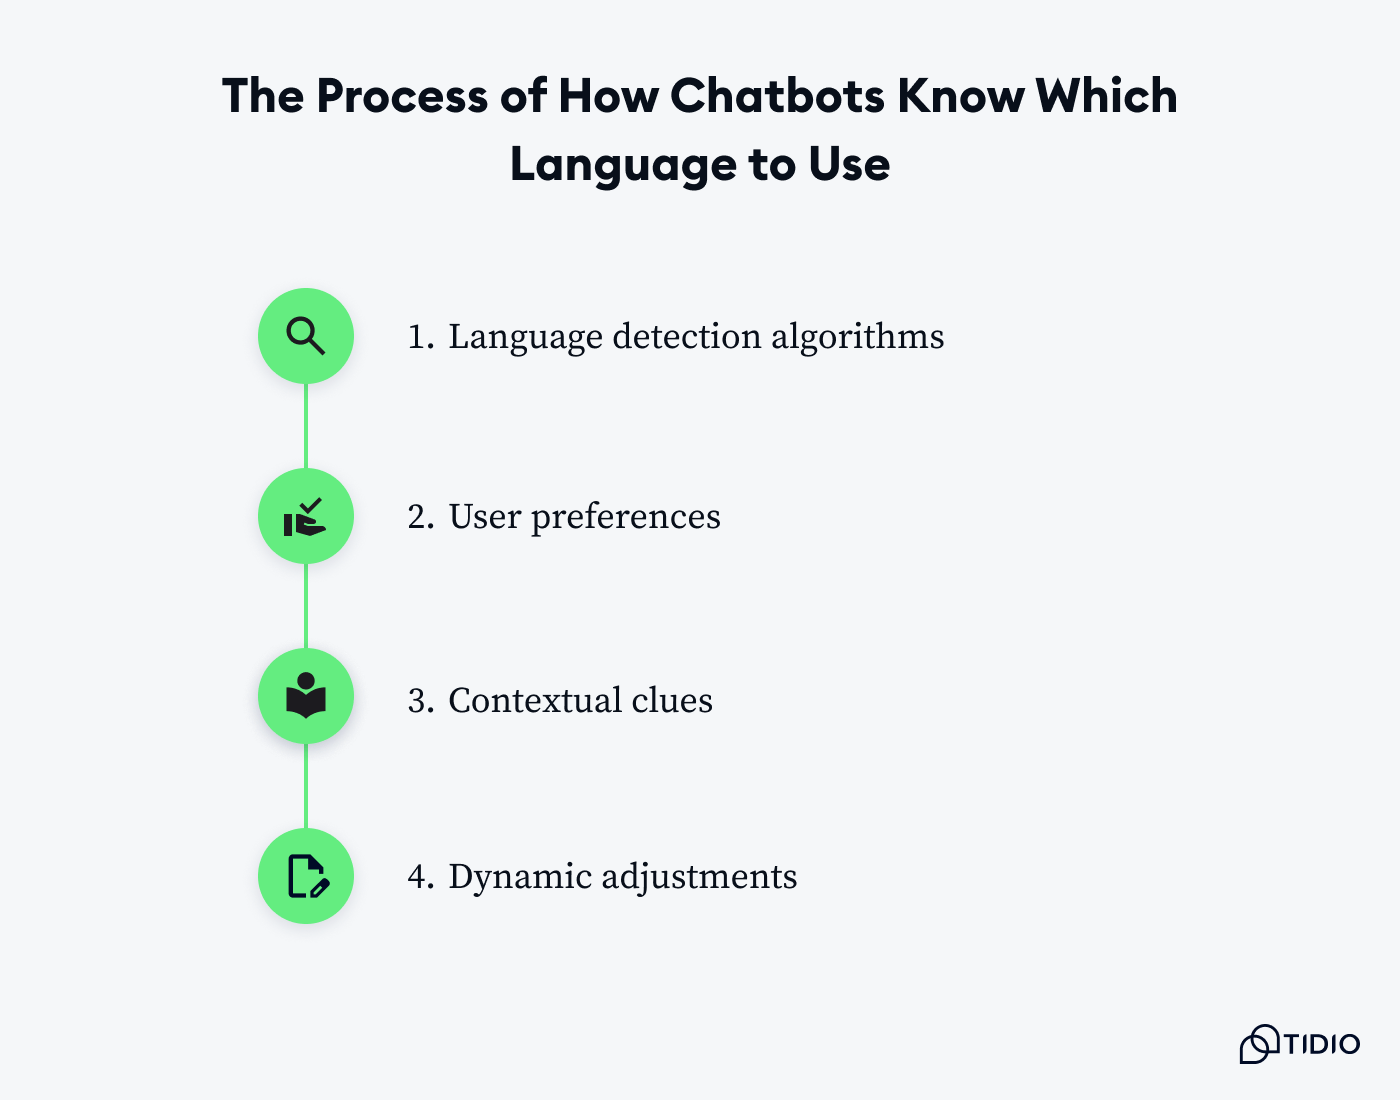 How do chatbots know which language to use on image